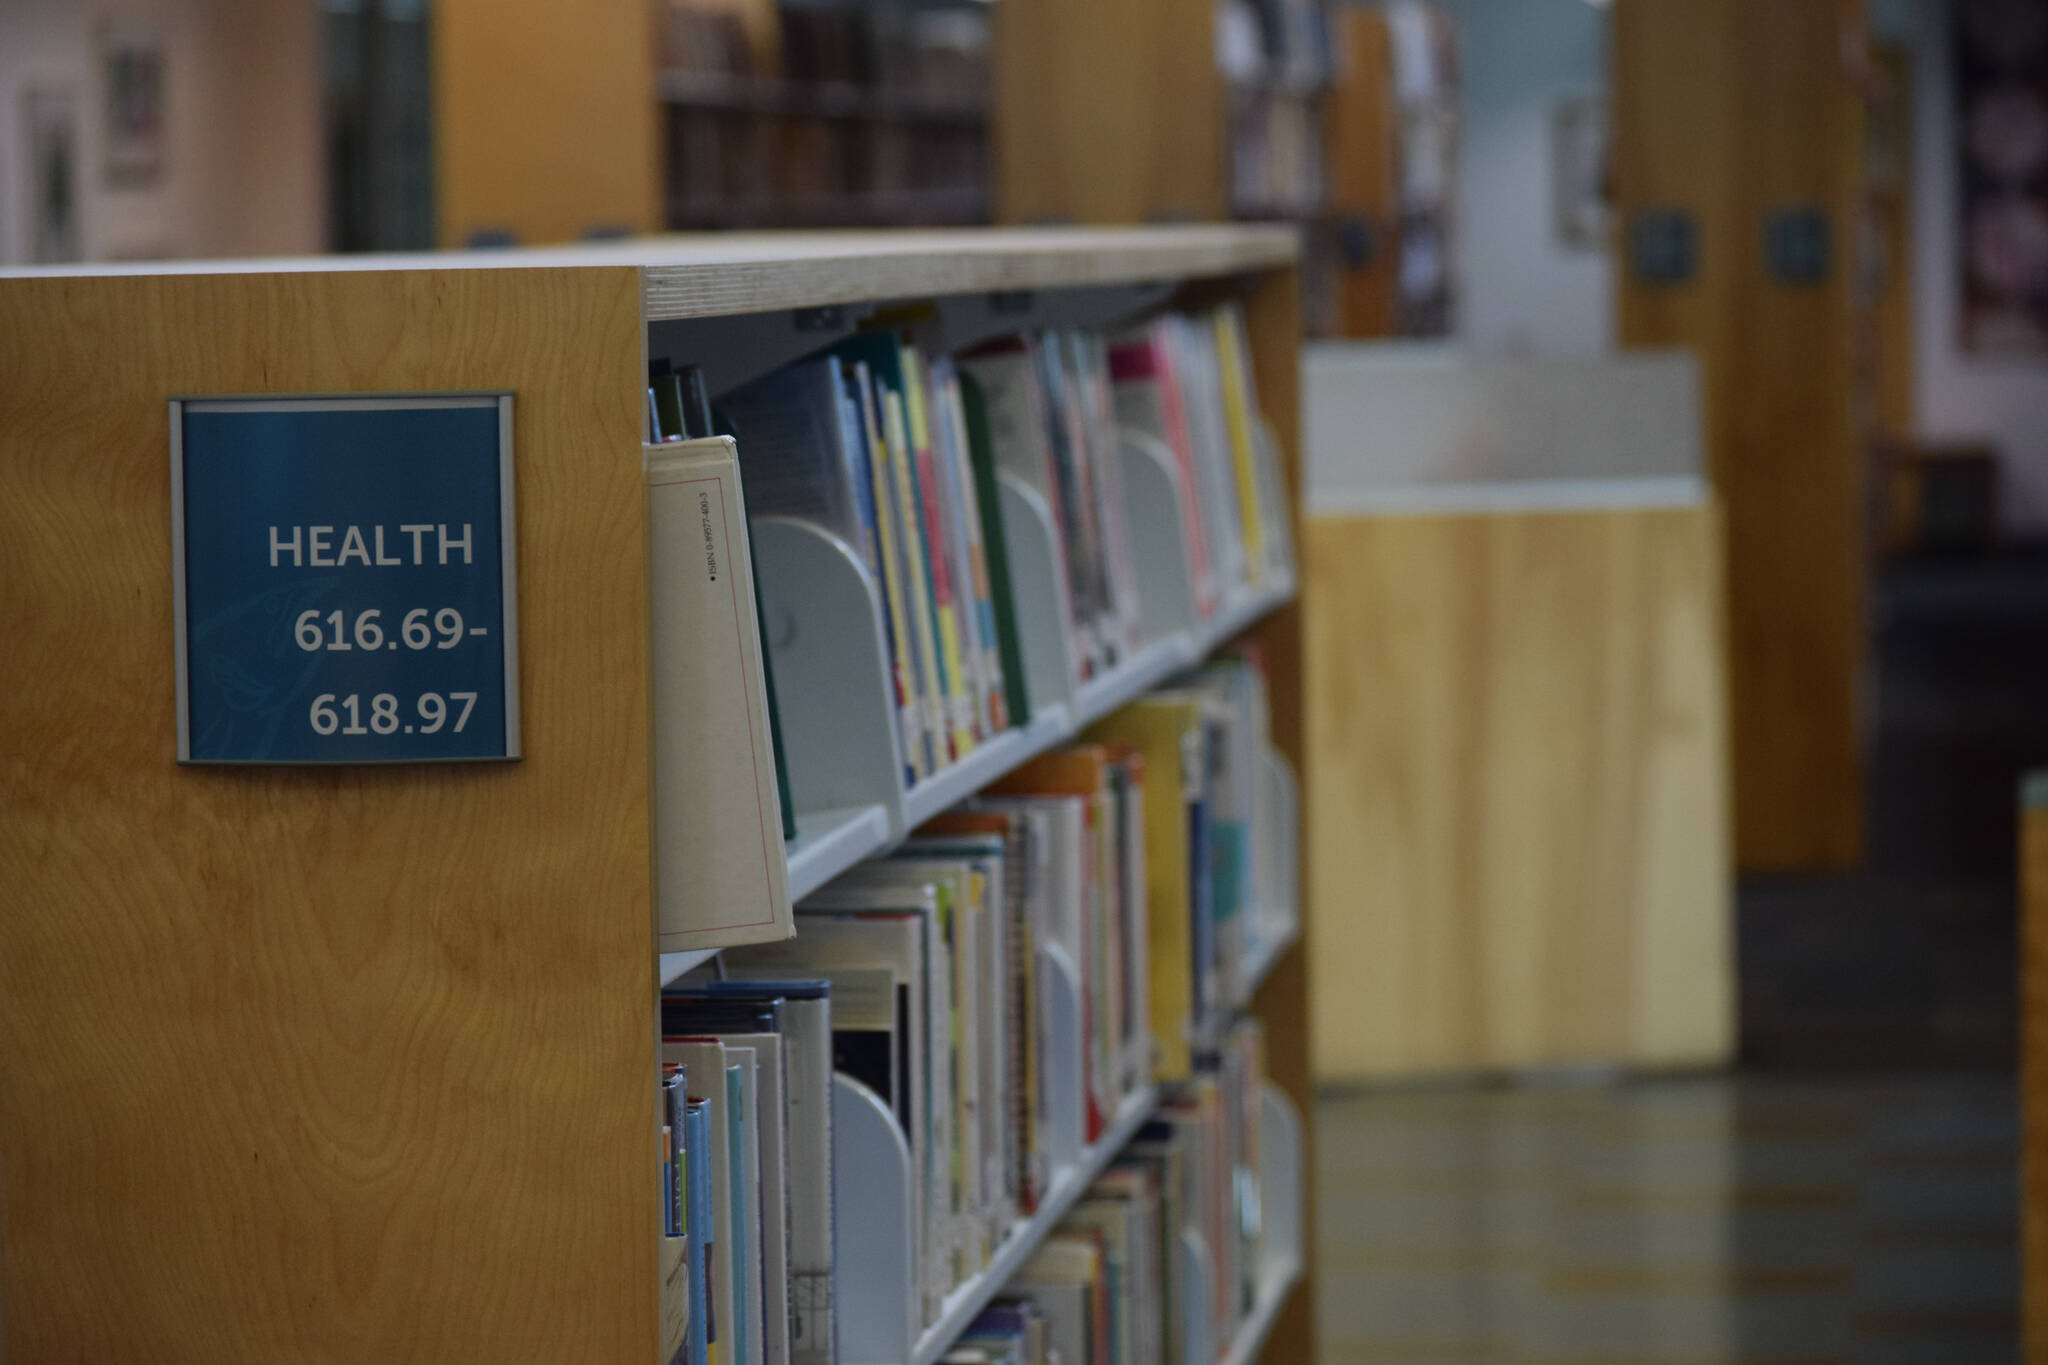 The Kenai Community Library health section is seen on Tuesday, Oct. 26, 2021. After the Kenai City Council postponed a vote to approve a grant funding health and wellness books, community members set up a GoFundMe to support the purchase of materials. (Camille Botello/Peninsula Clarion)